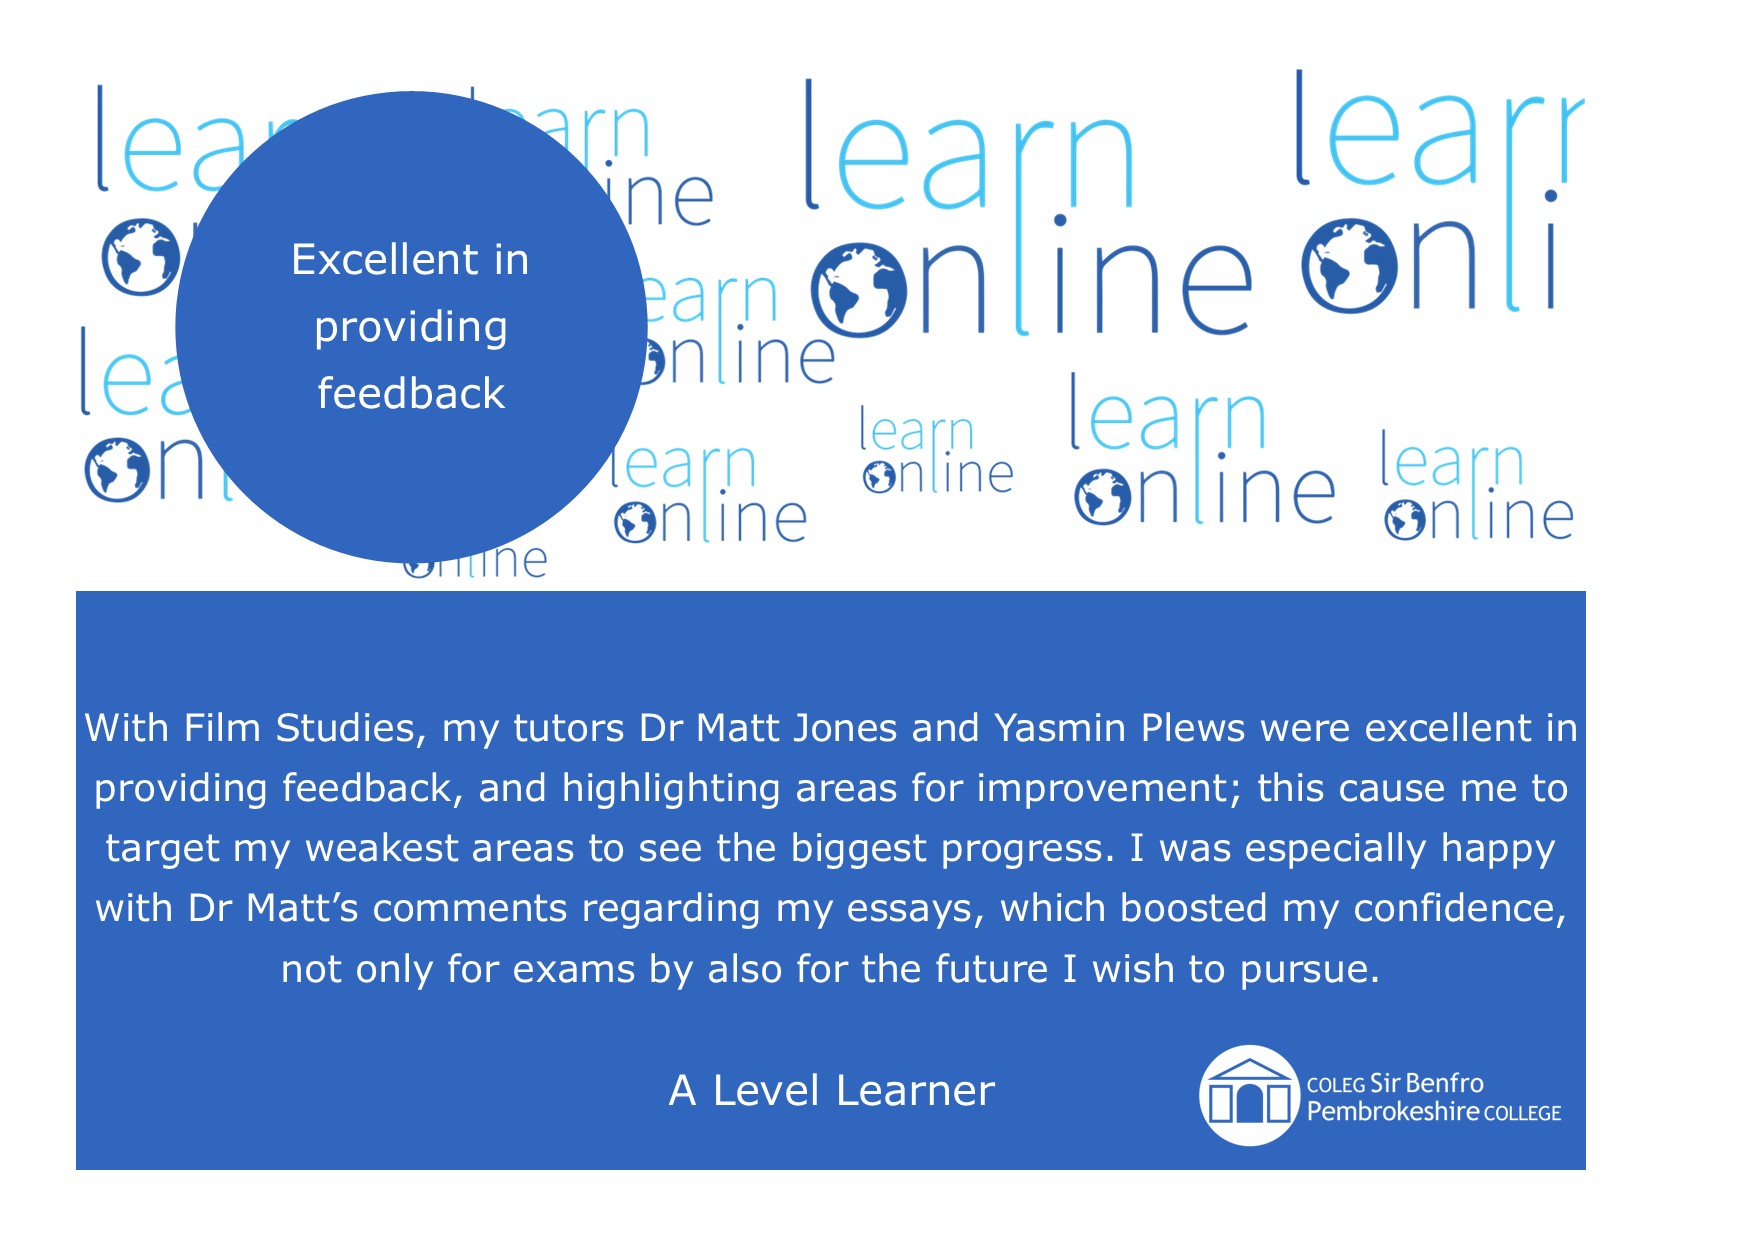 LearnOnline Testimonial - 'Excellent in providing feedback' With Film Studies, my tutors Dr Matt Jones and Yasmin Plews were excellent in providing feedback, and highlighting areas for improvement; this cause me to target my weakest areas to see the biggest progress. I was especially happy with Dr Matt’s comments regarding my essays, which boosted my confidence, not only for exams by also for the future I wish to pursue. A Level Learner